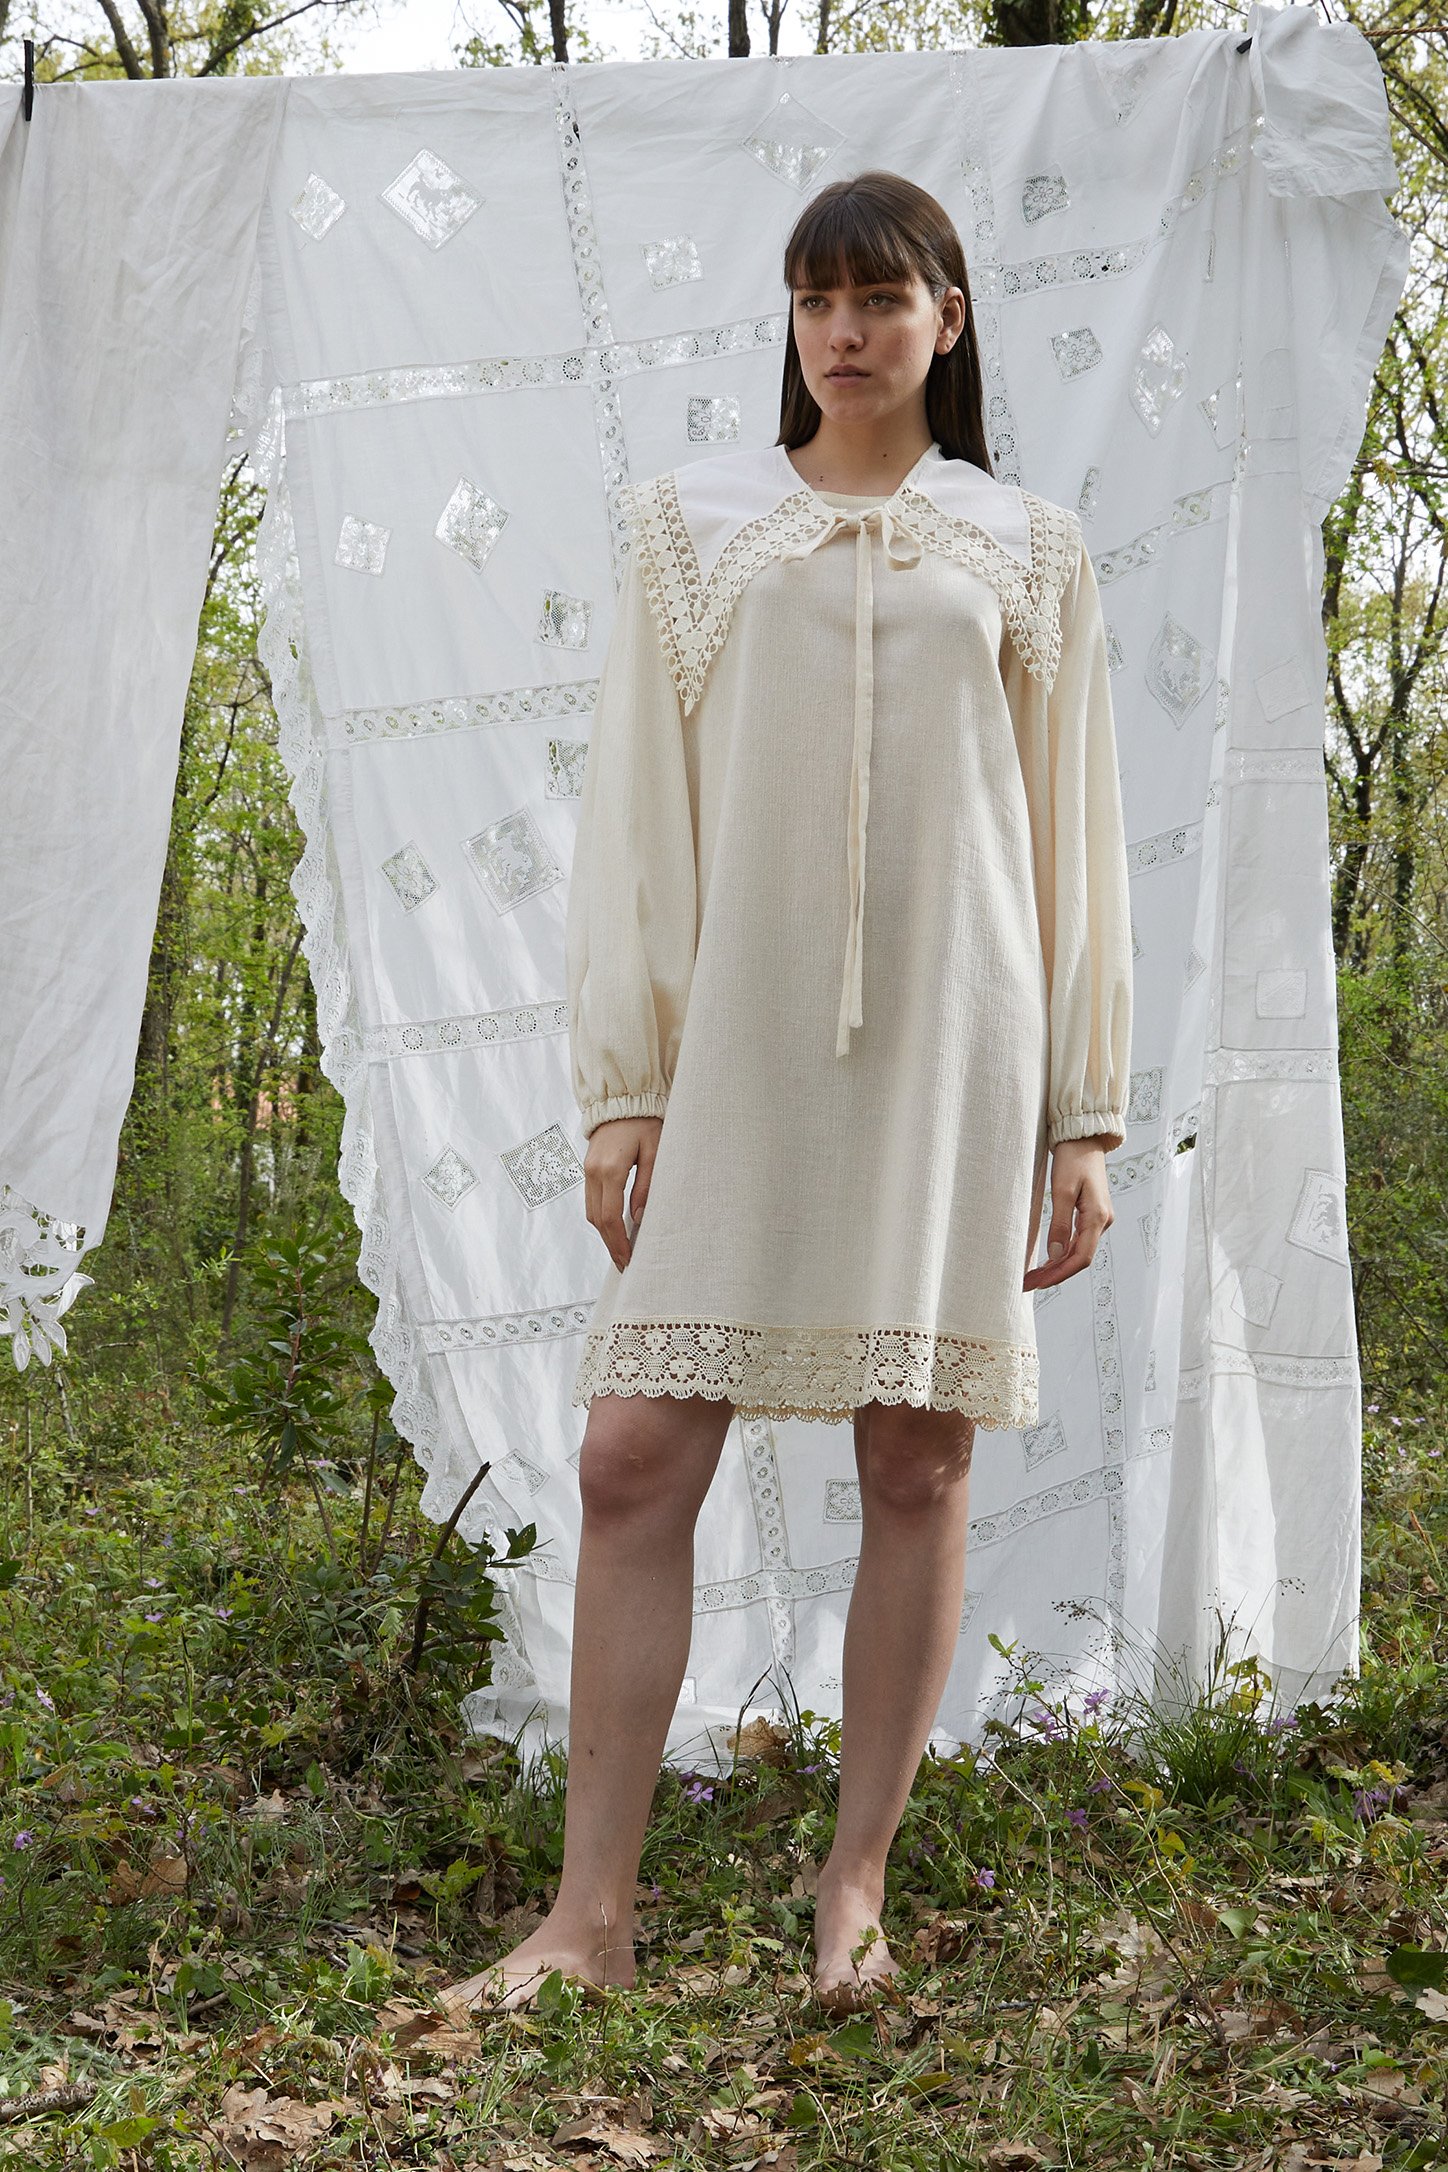 Hand-Woven Buldan Cloth Robe Dress with Embroidered Hem and Sleeves